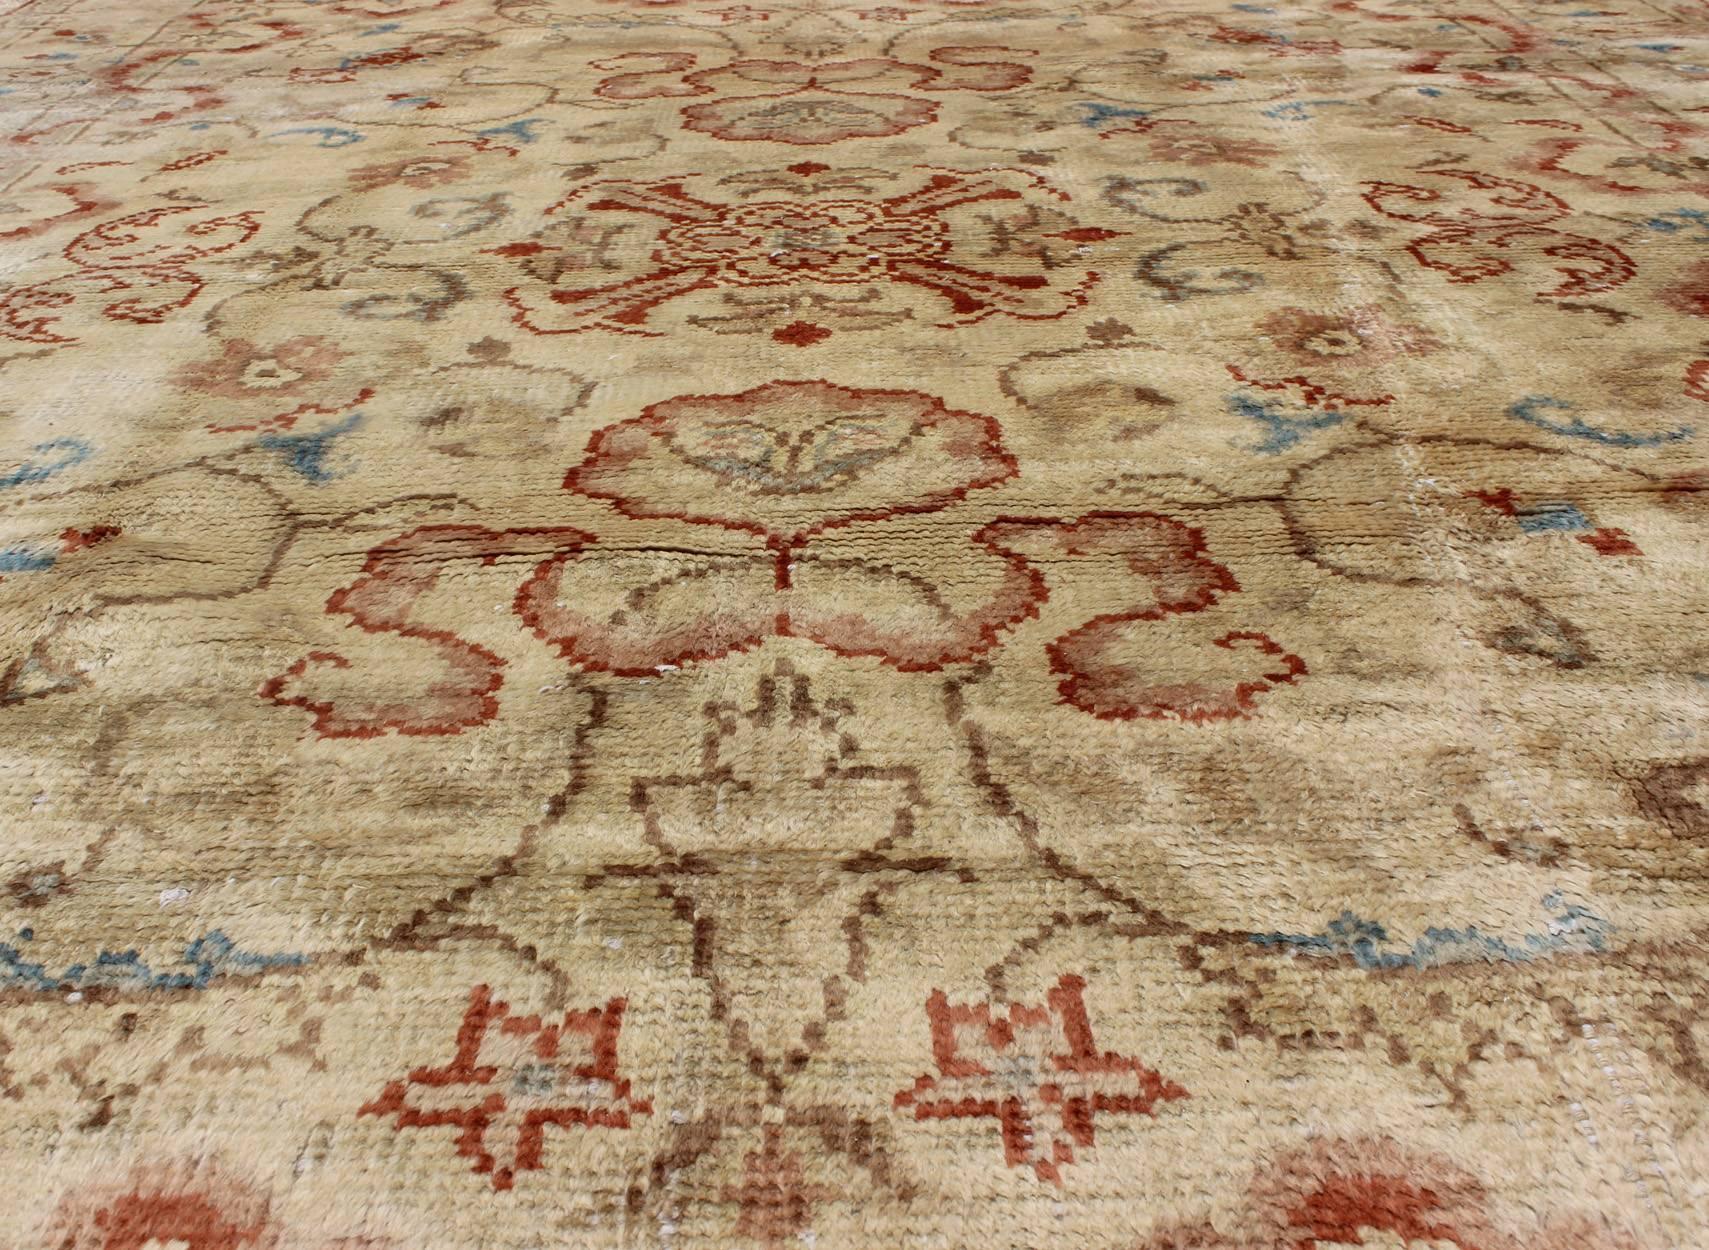 Mid-20th Century Square Vintage Oushak Rug with All-Over Floral Design in Butter, Red, Lt. Green